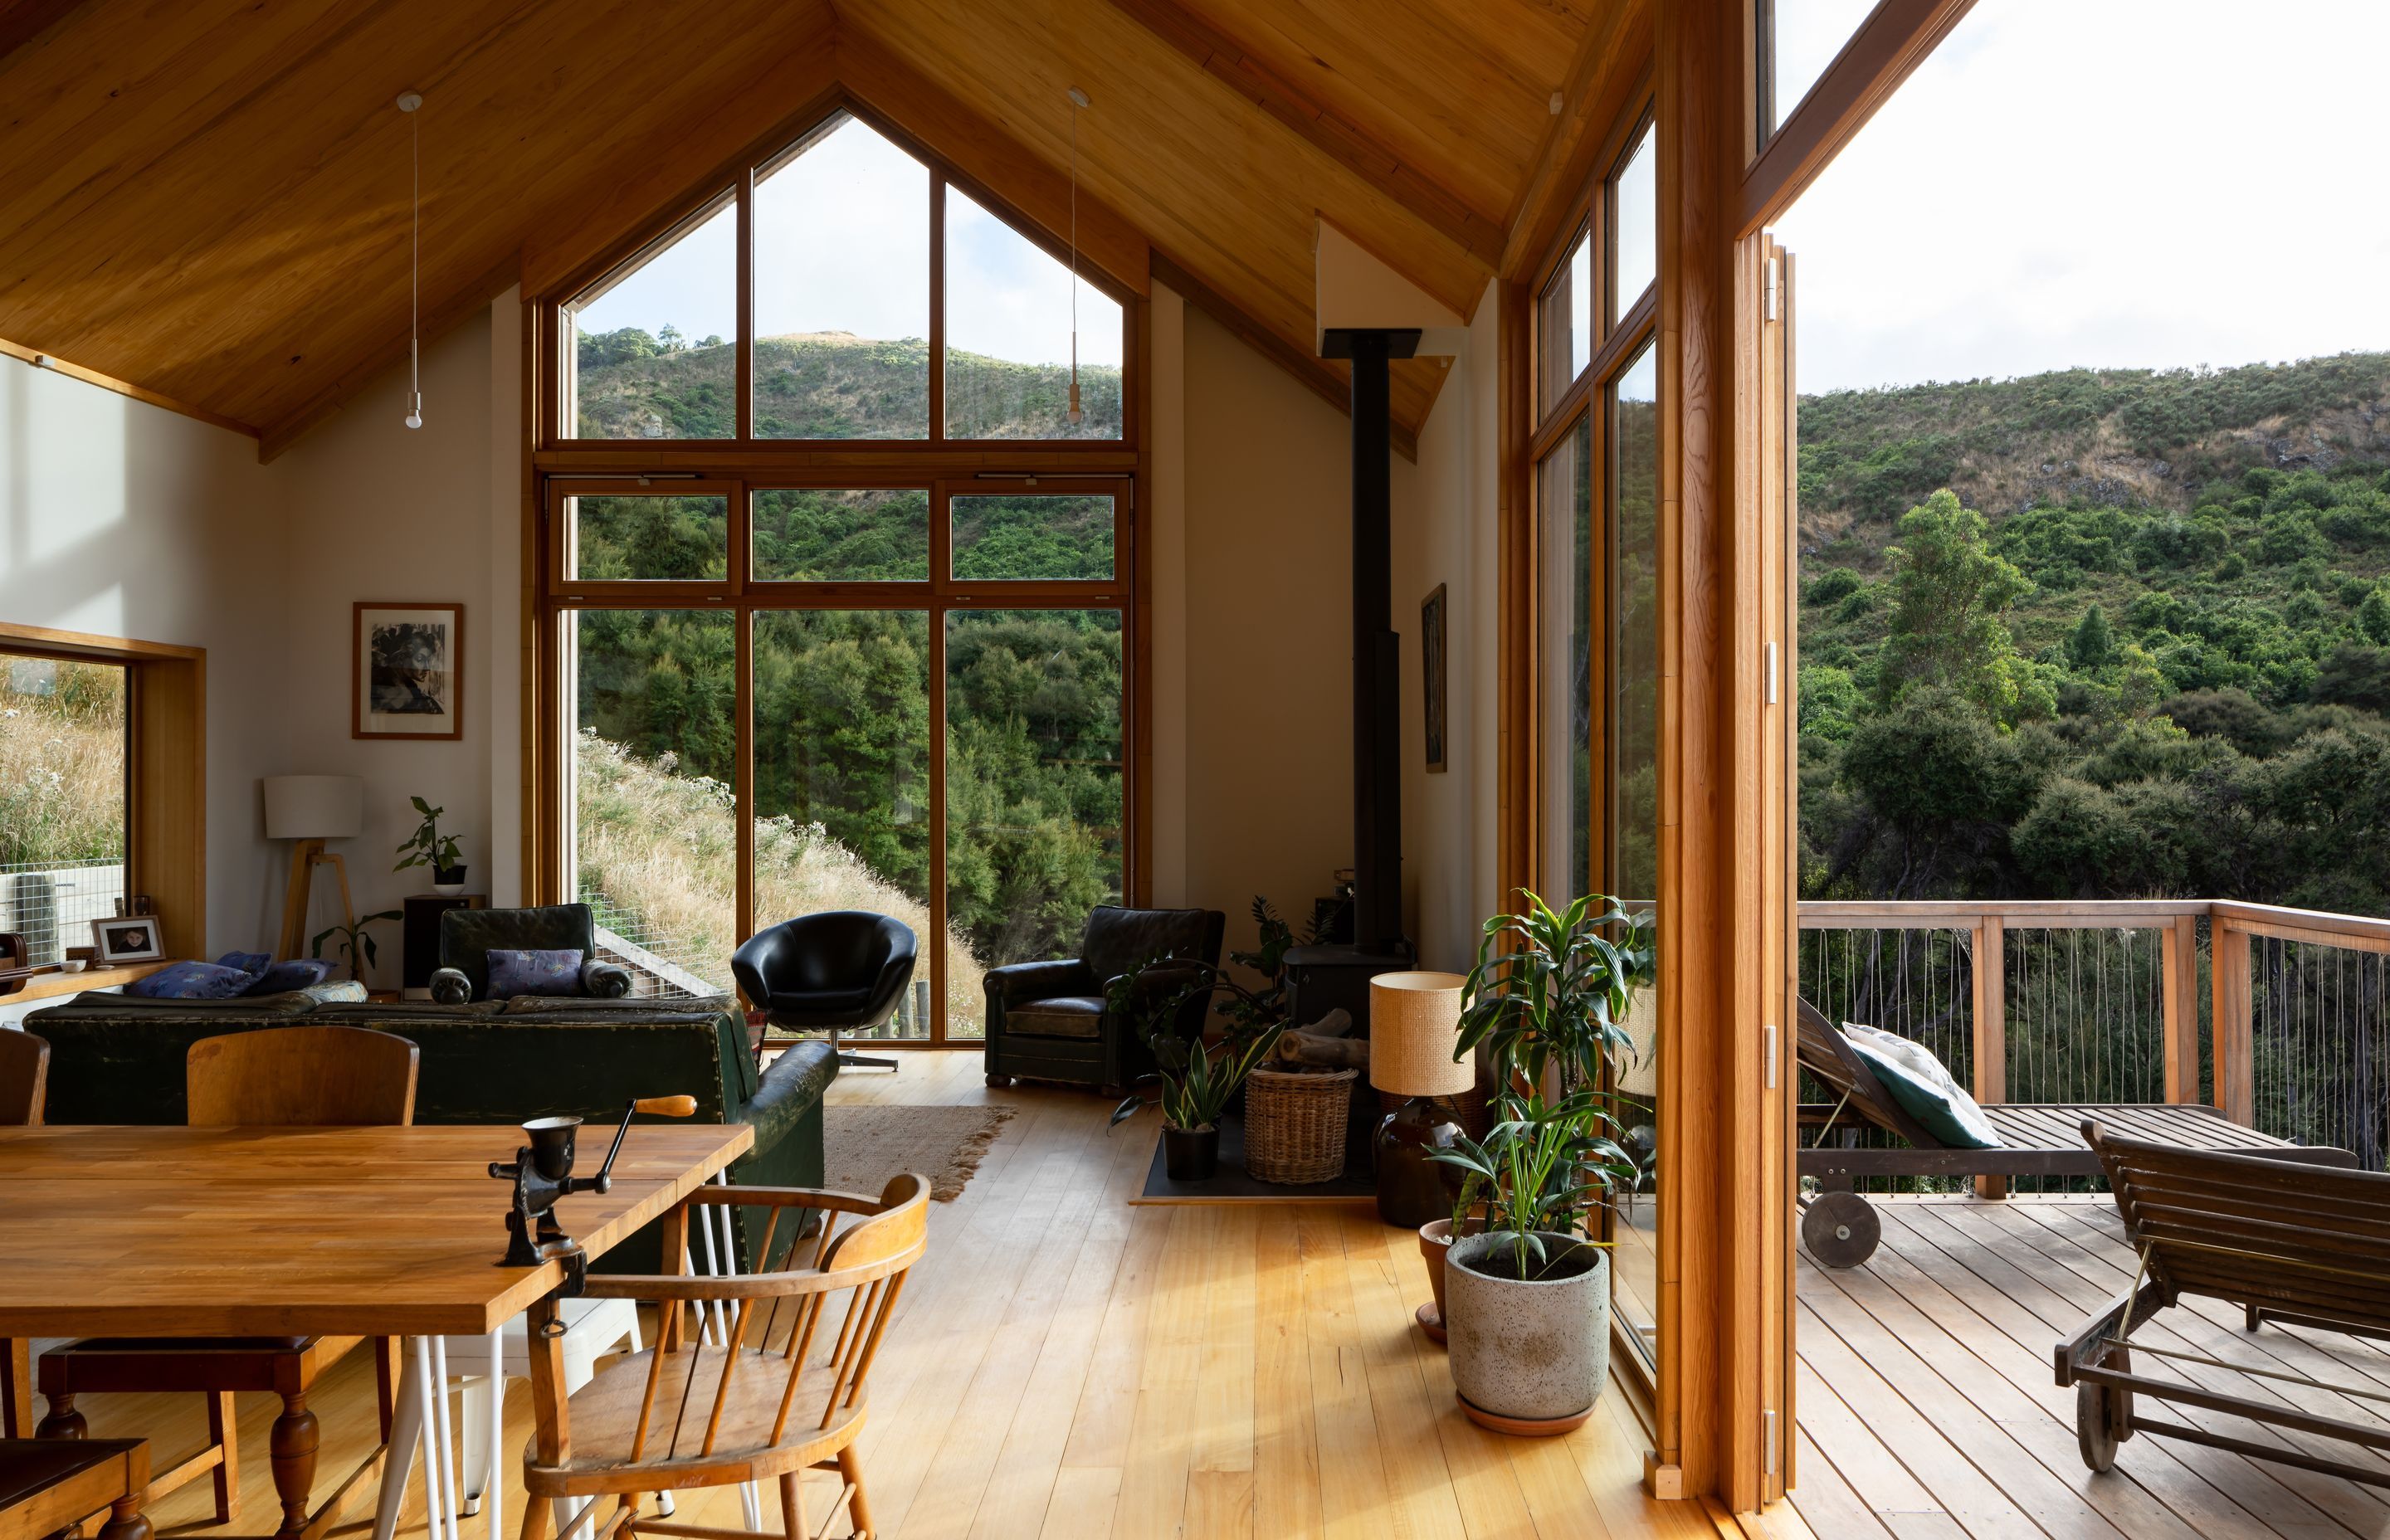 A cathedral-like gabled window draws light into the interior and frames the neighbouring bush-clad hill.